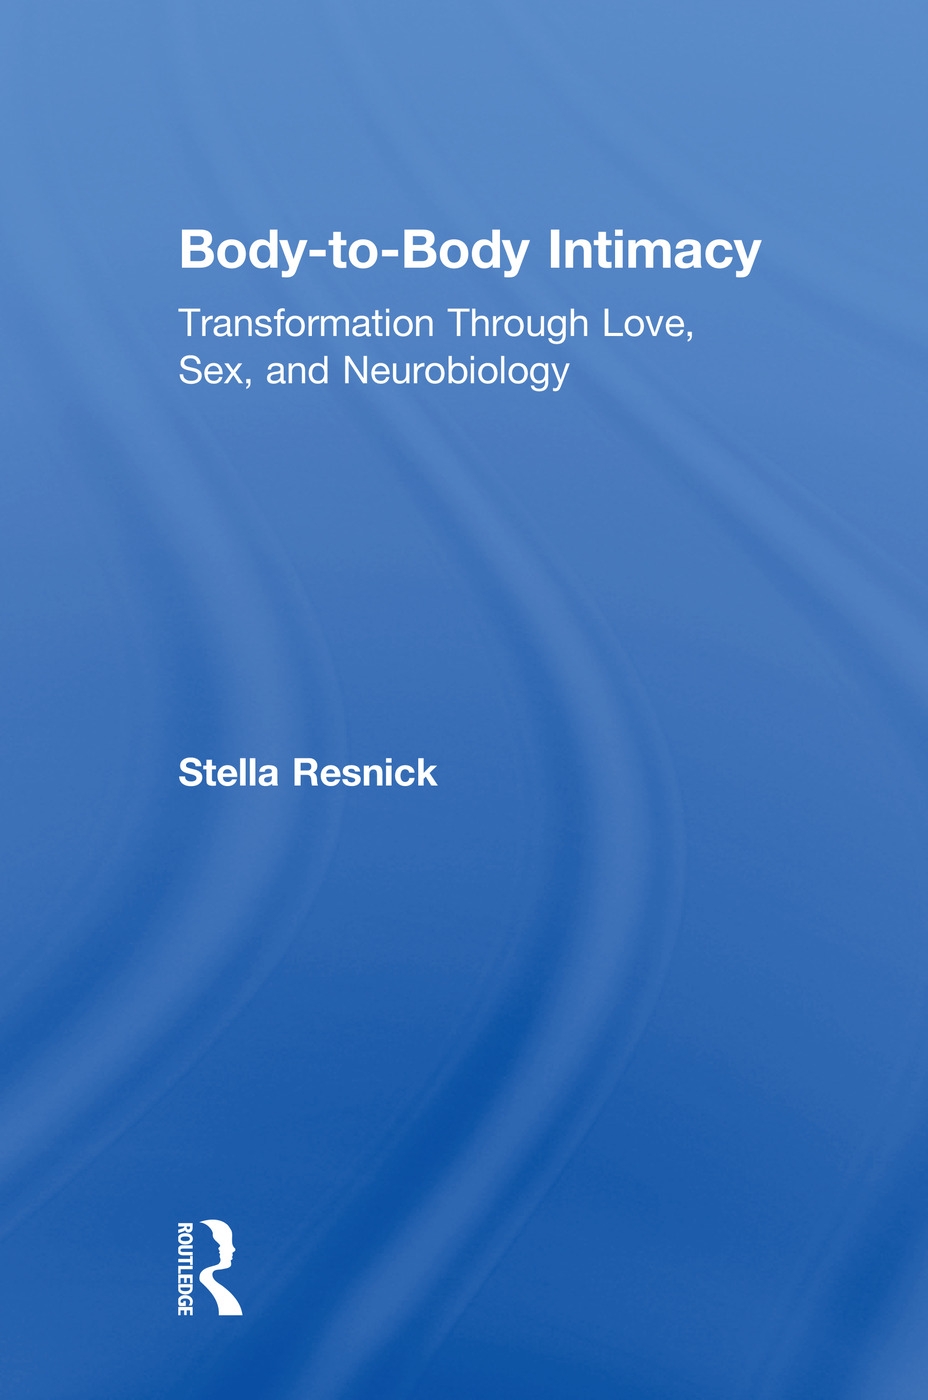 Body-To-Body Intimacy: Transformation Through Love, Sex, and Neurobiology